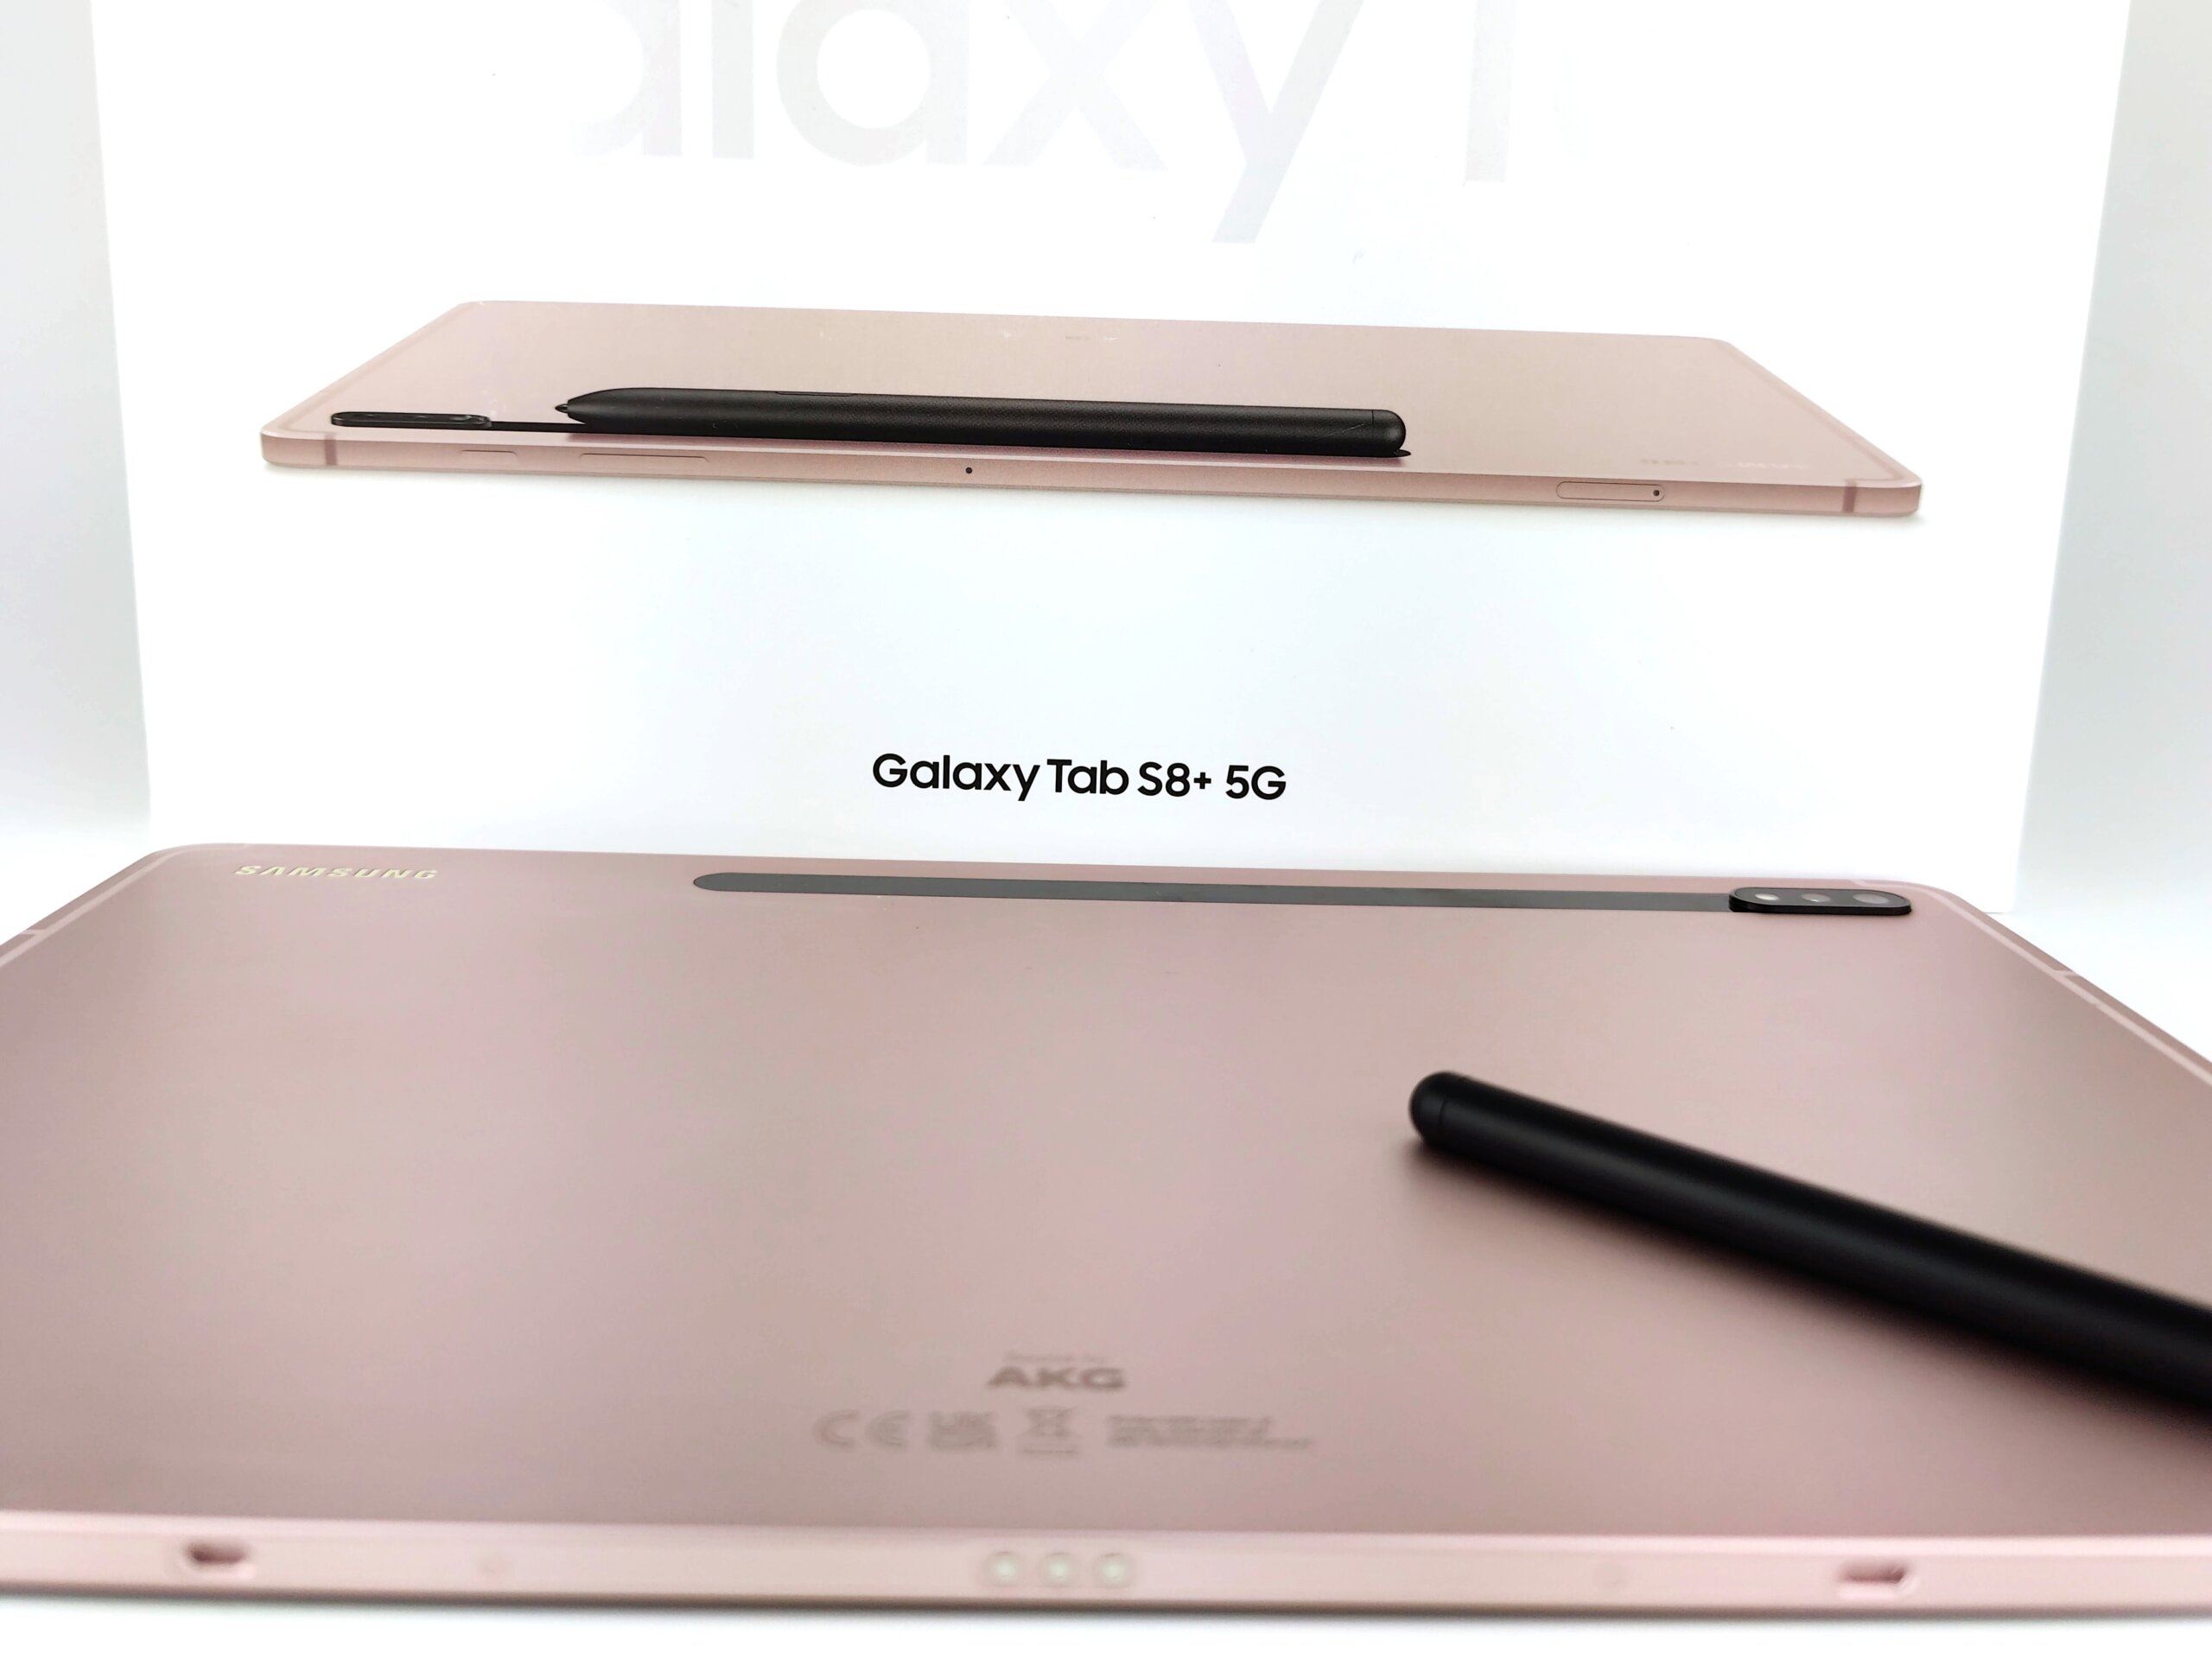 Evaluation abstract Samsung Galaxy Tab S8+: One among the finest Android medicines readily available leaves room for progress